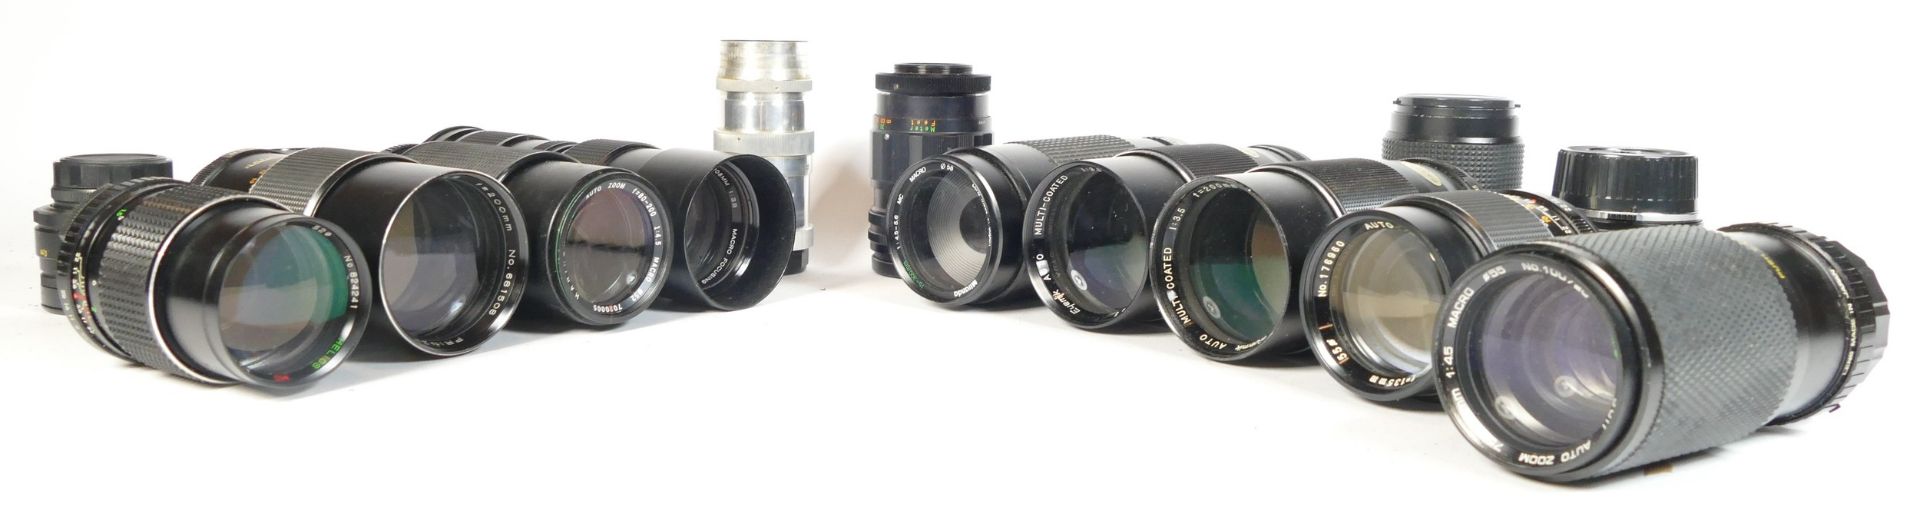 Eight SLR vintage film cameras to include a Zenit E, a Praktica BC1, a Ricoh KR10 and a Zenit II. - Image 4 of 4